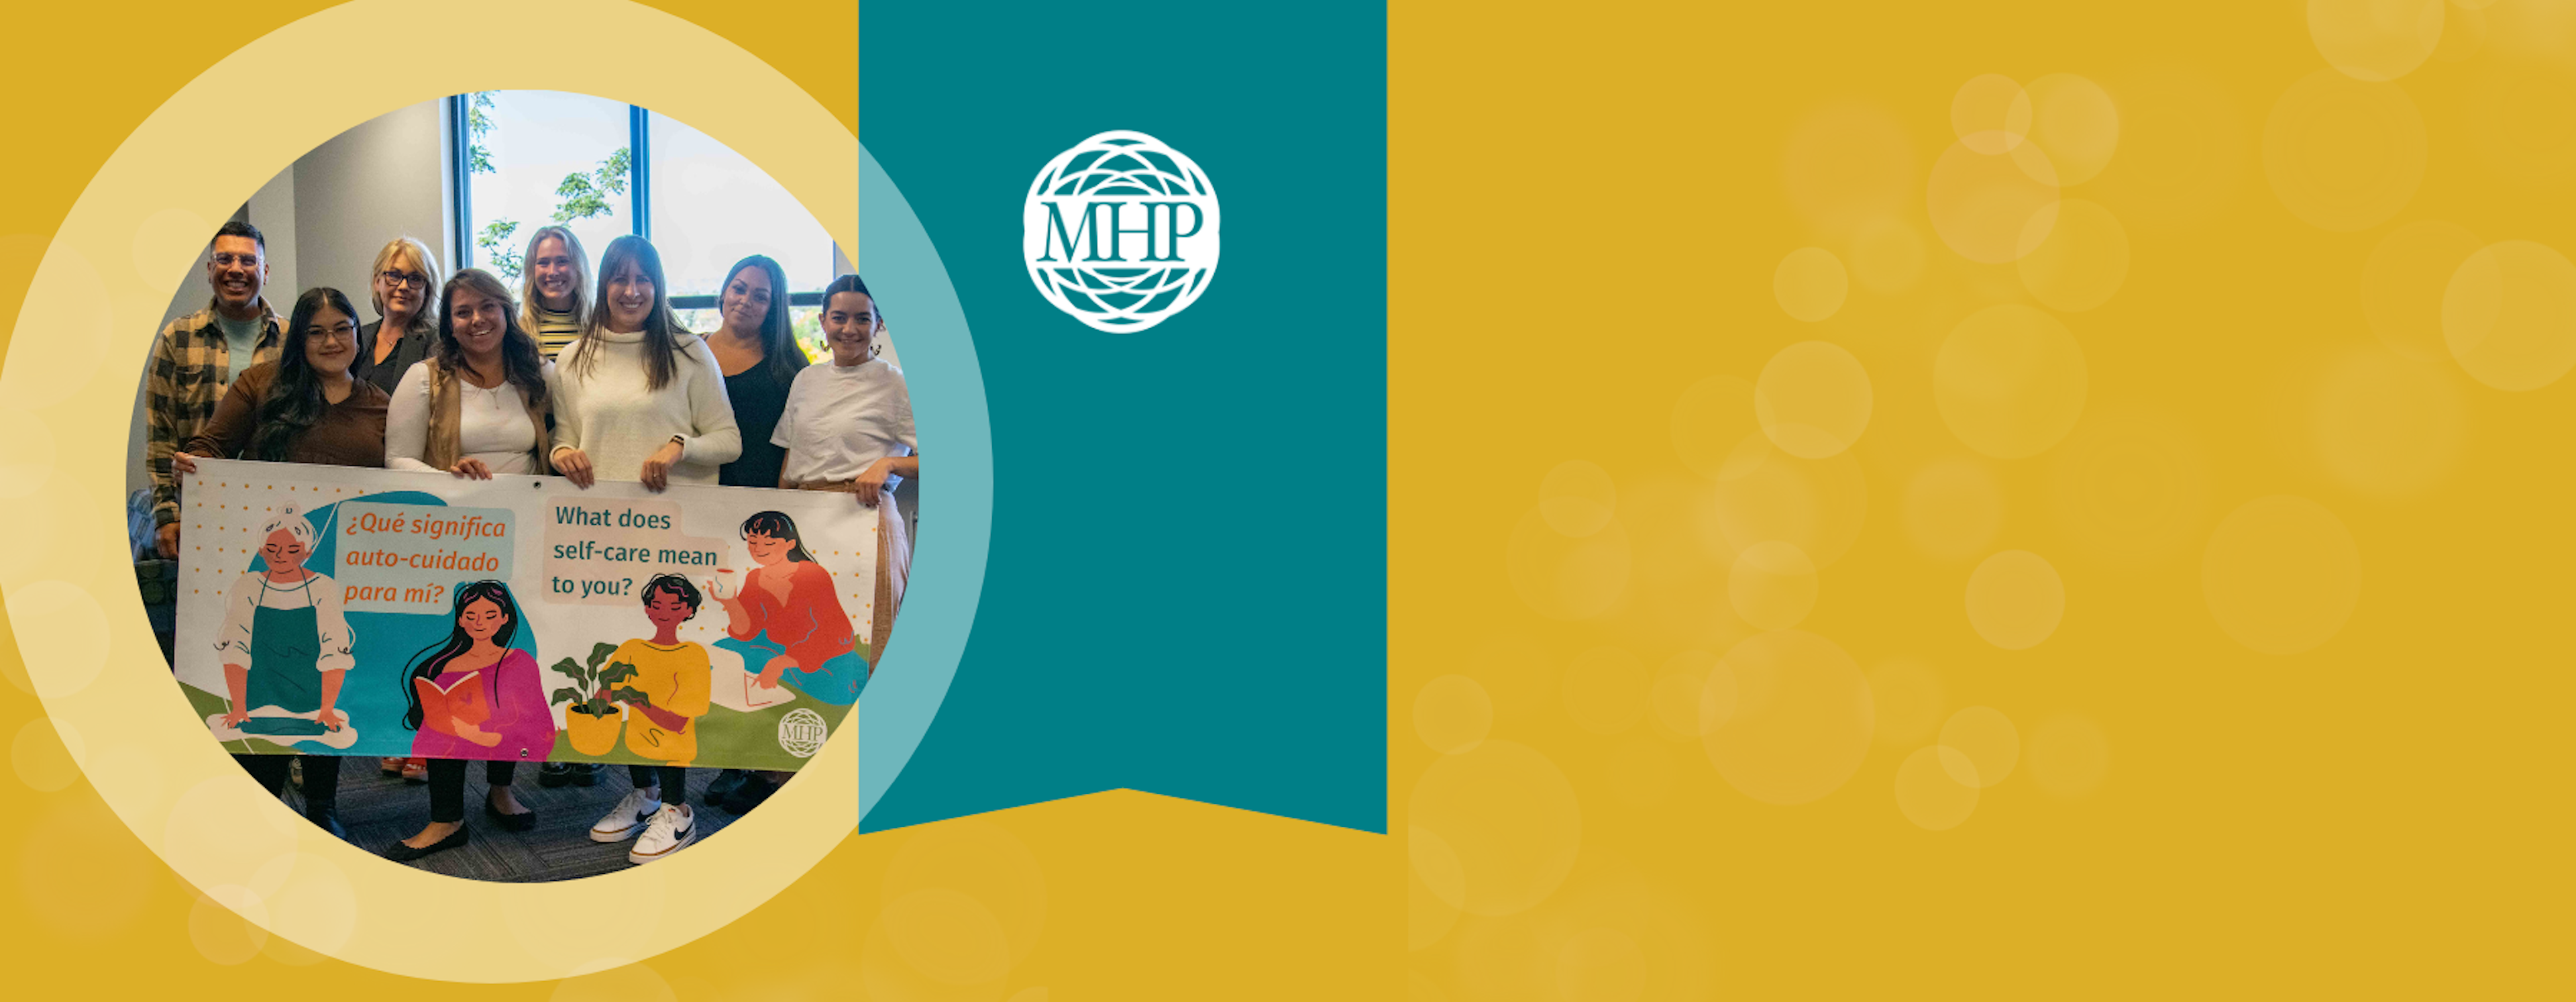 MHP logo and community health worker team